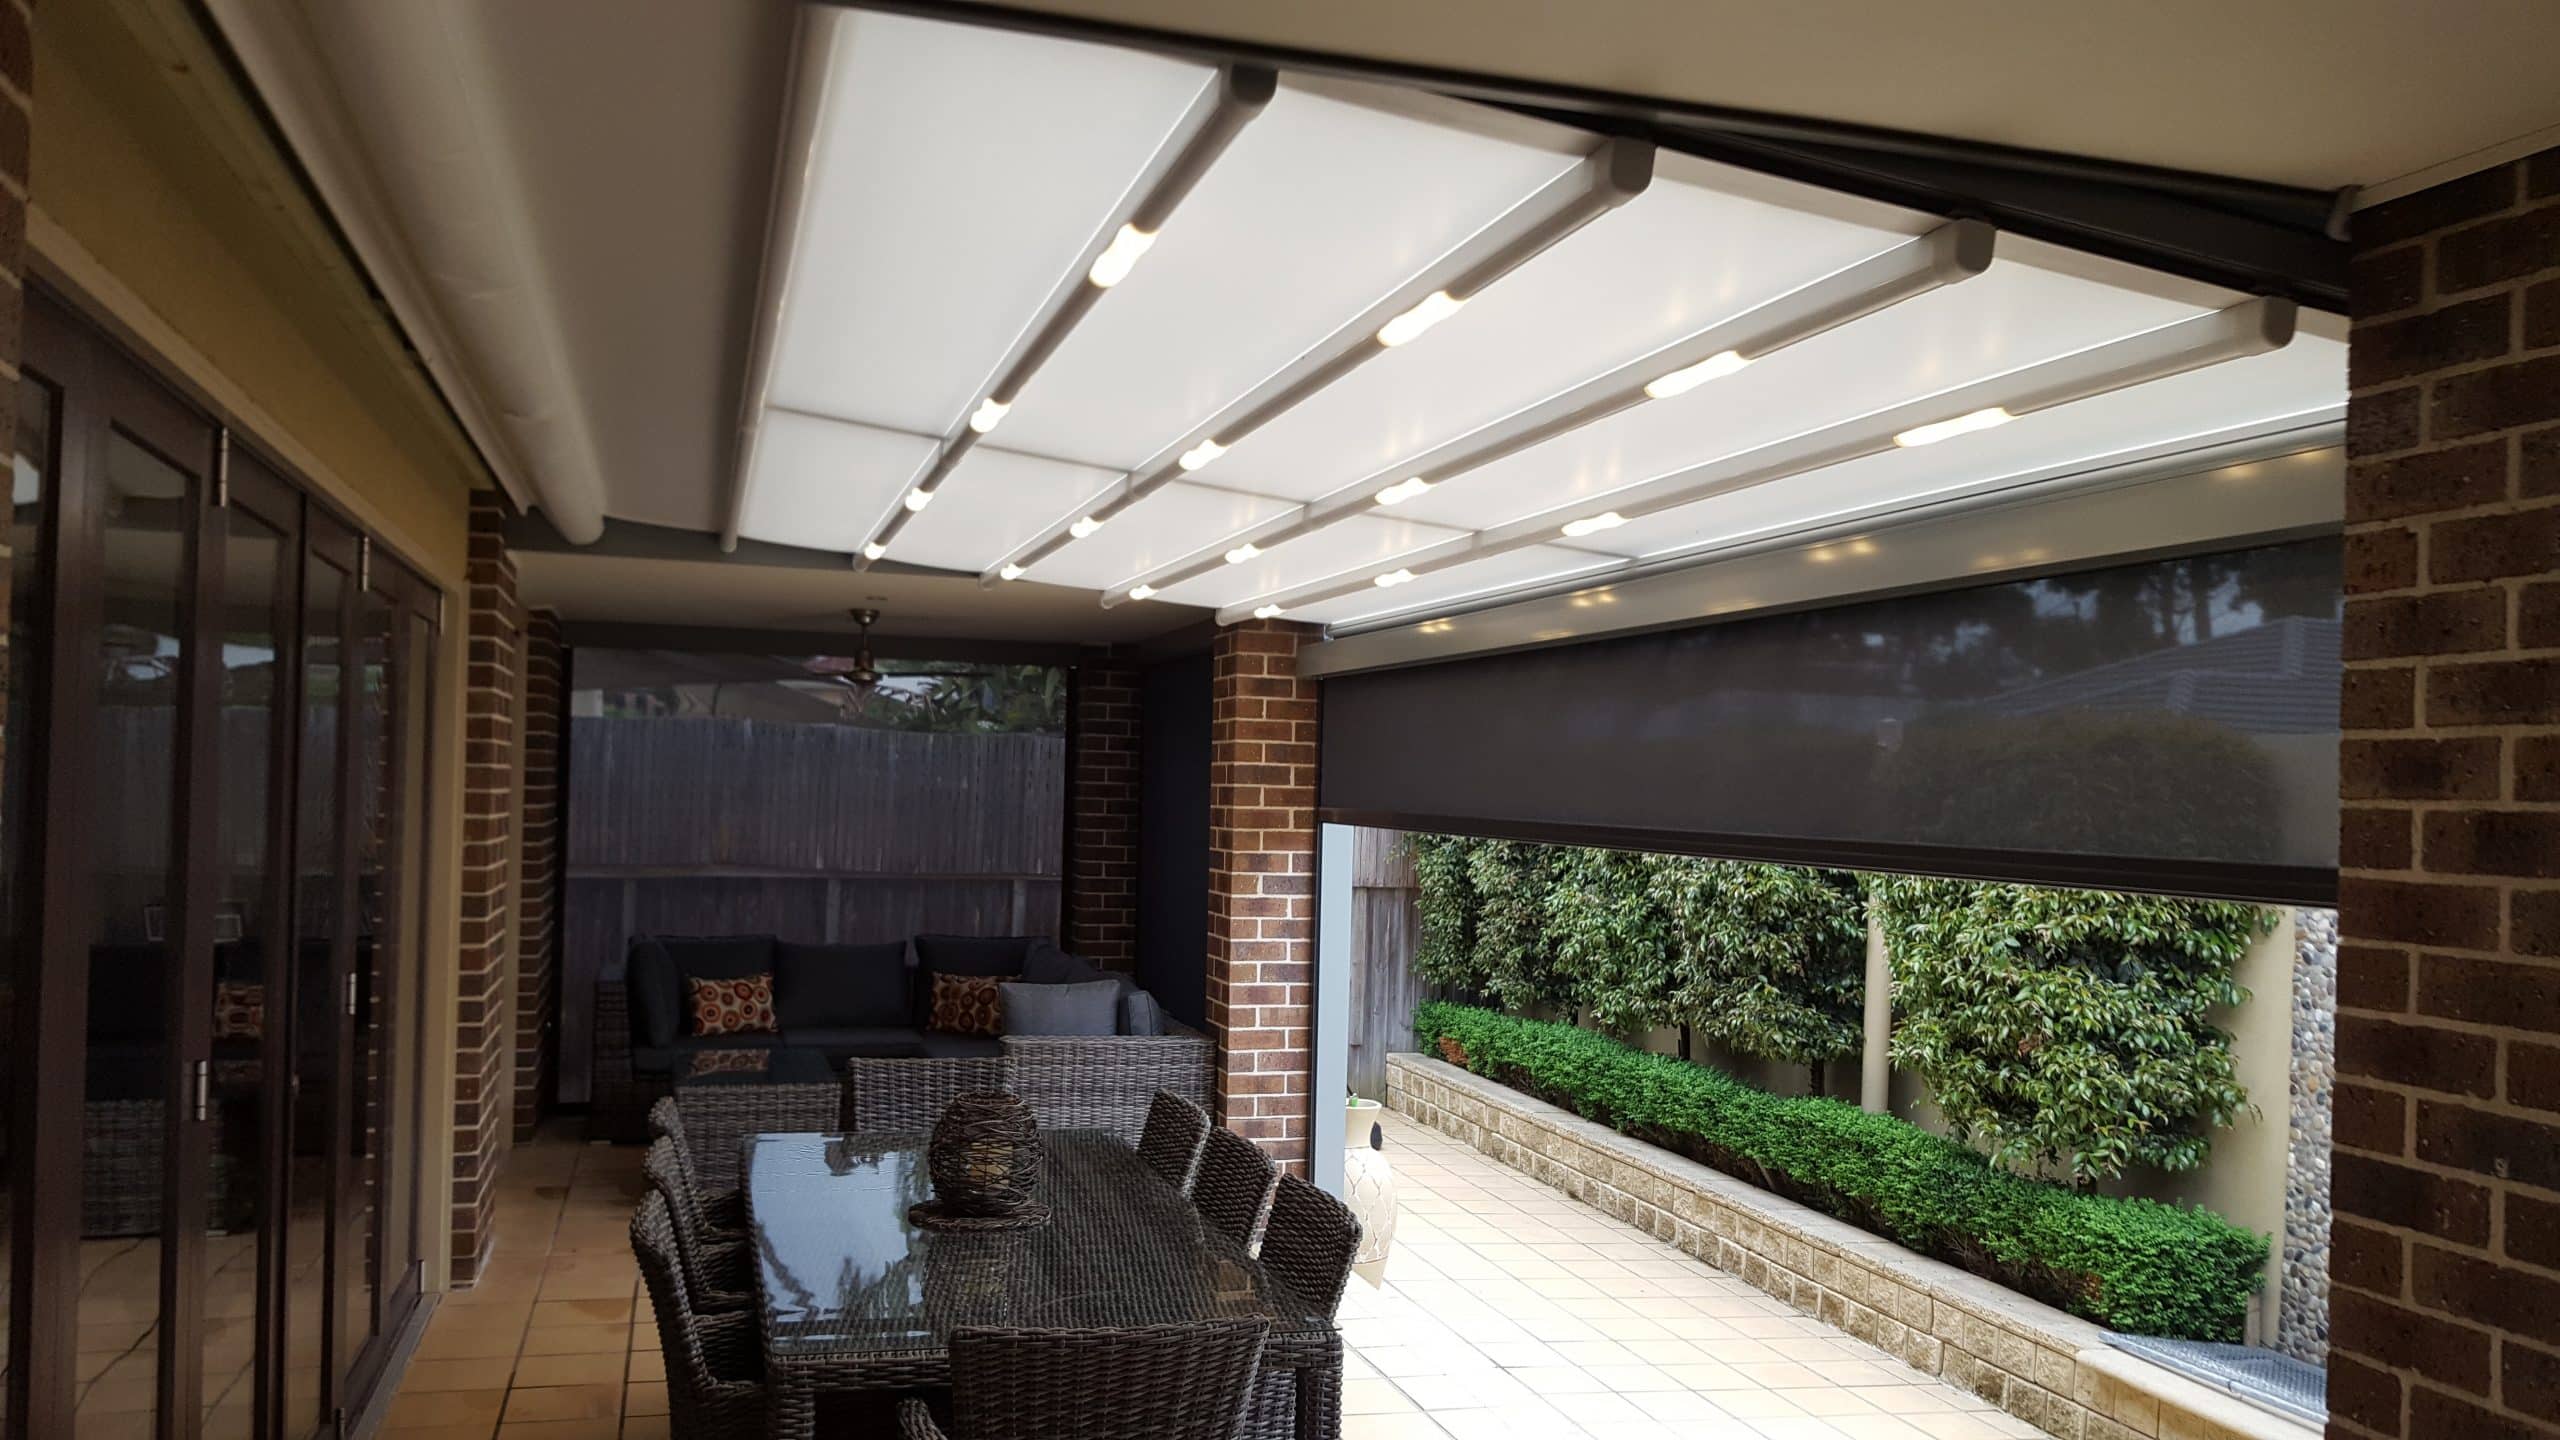 Retractable Roofing Systems Melbourne Roof Awnings And Pergolas